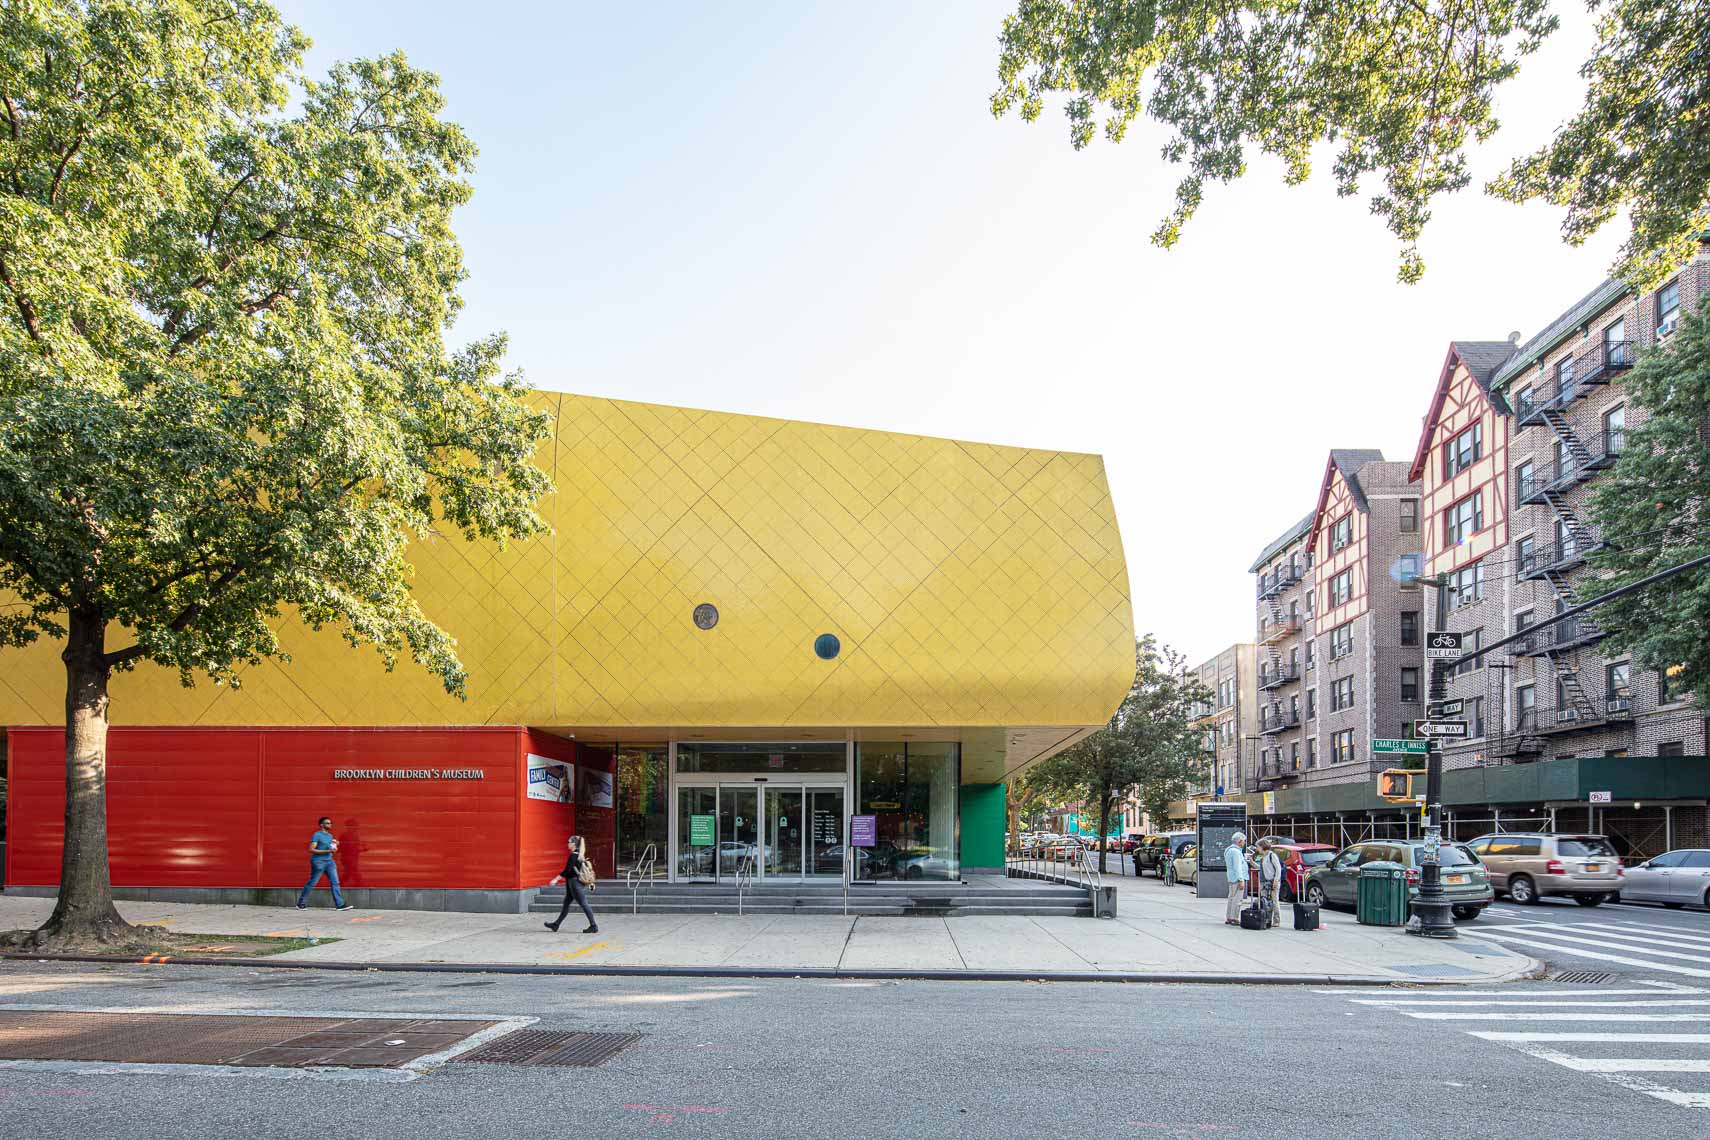 Colorful exterior of museum in an urban neighborhood